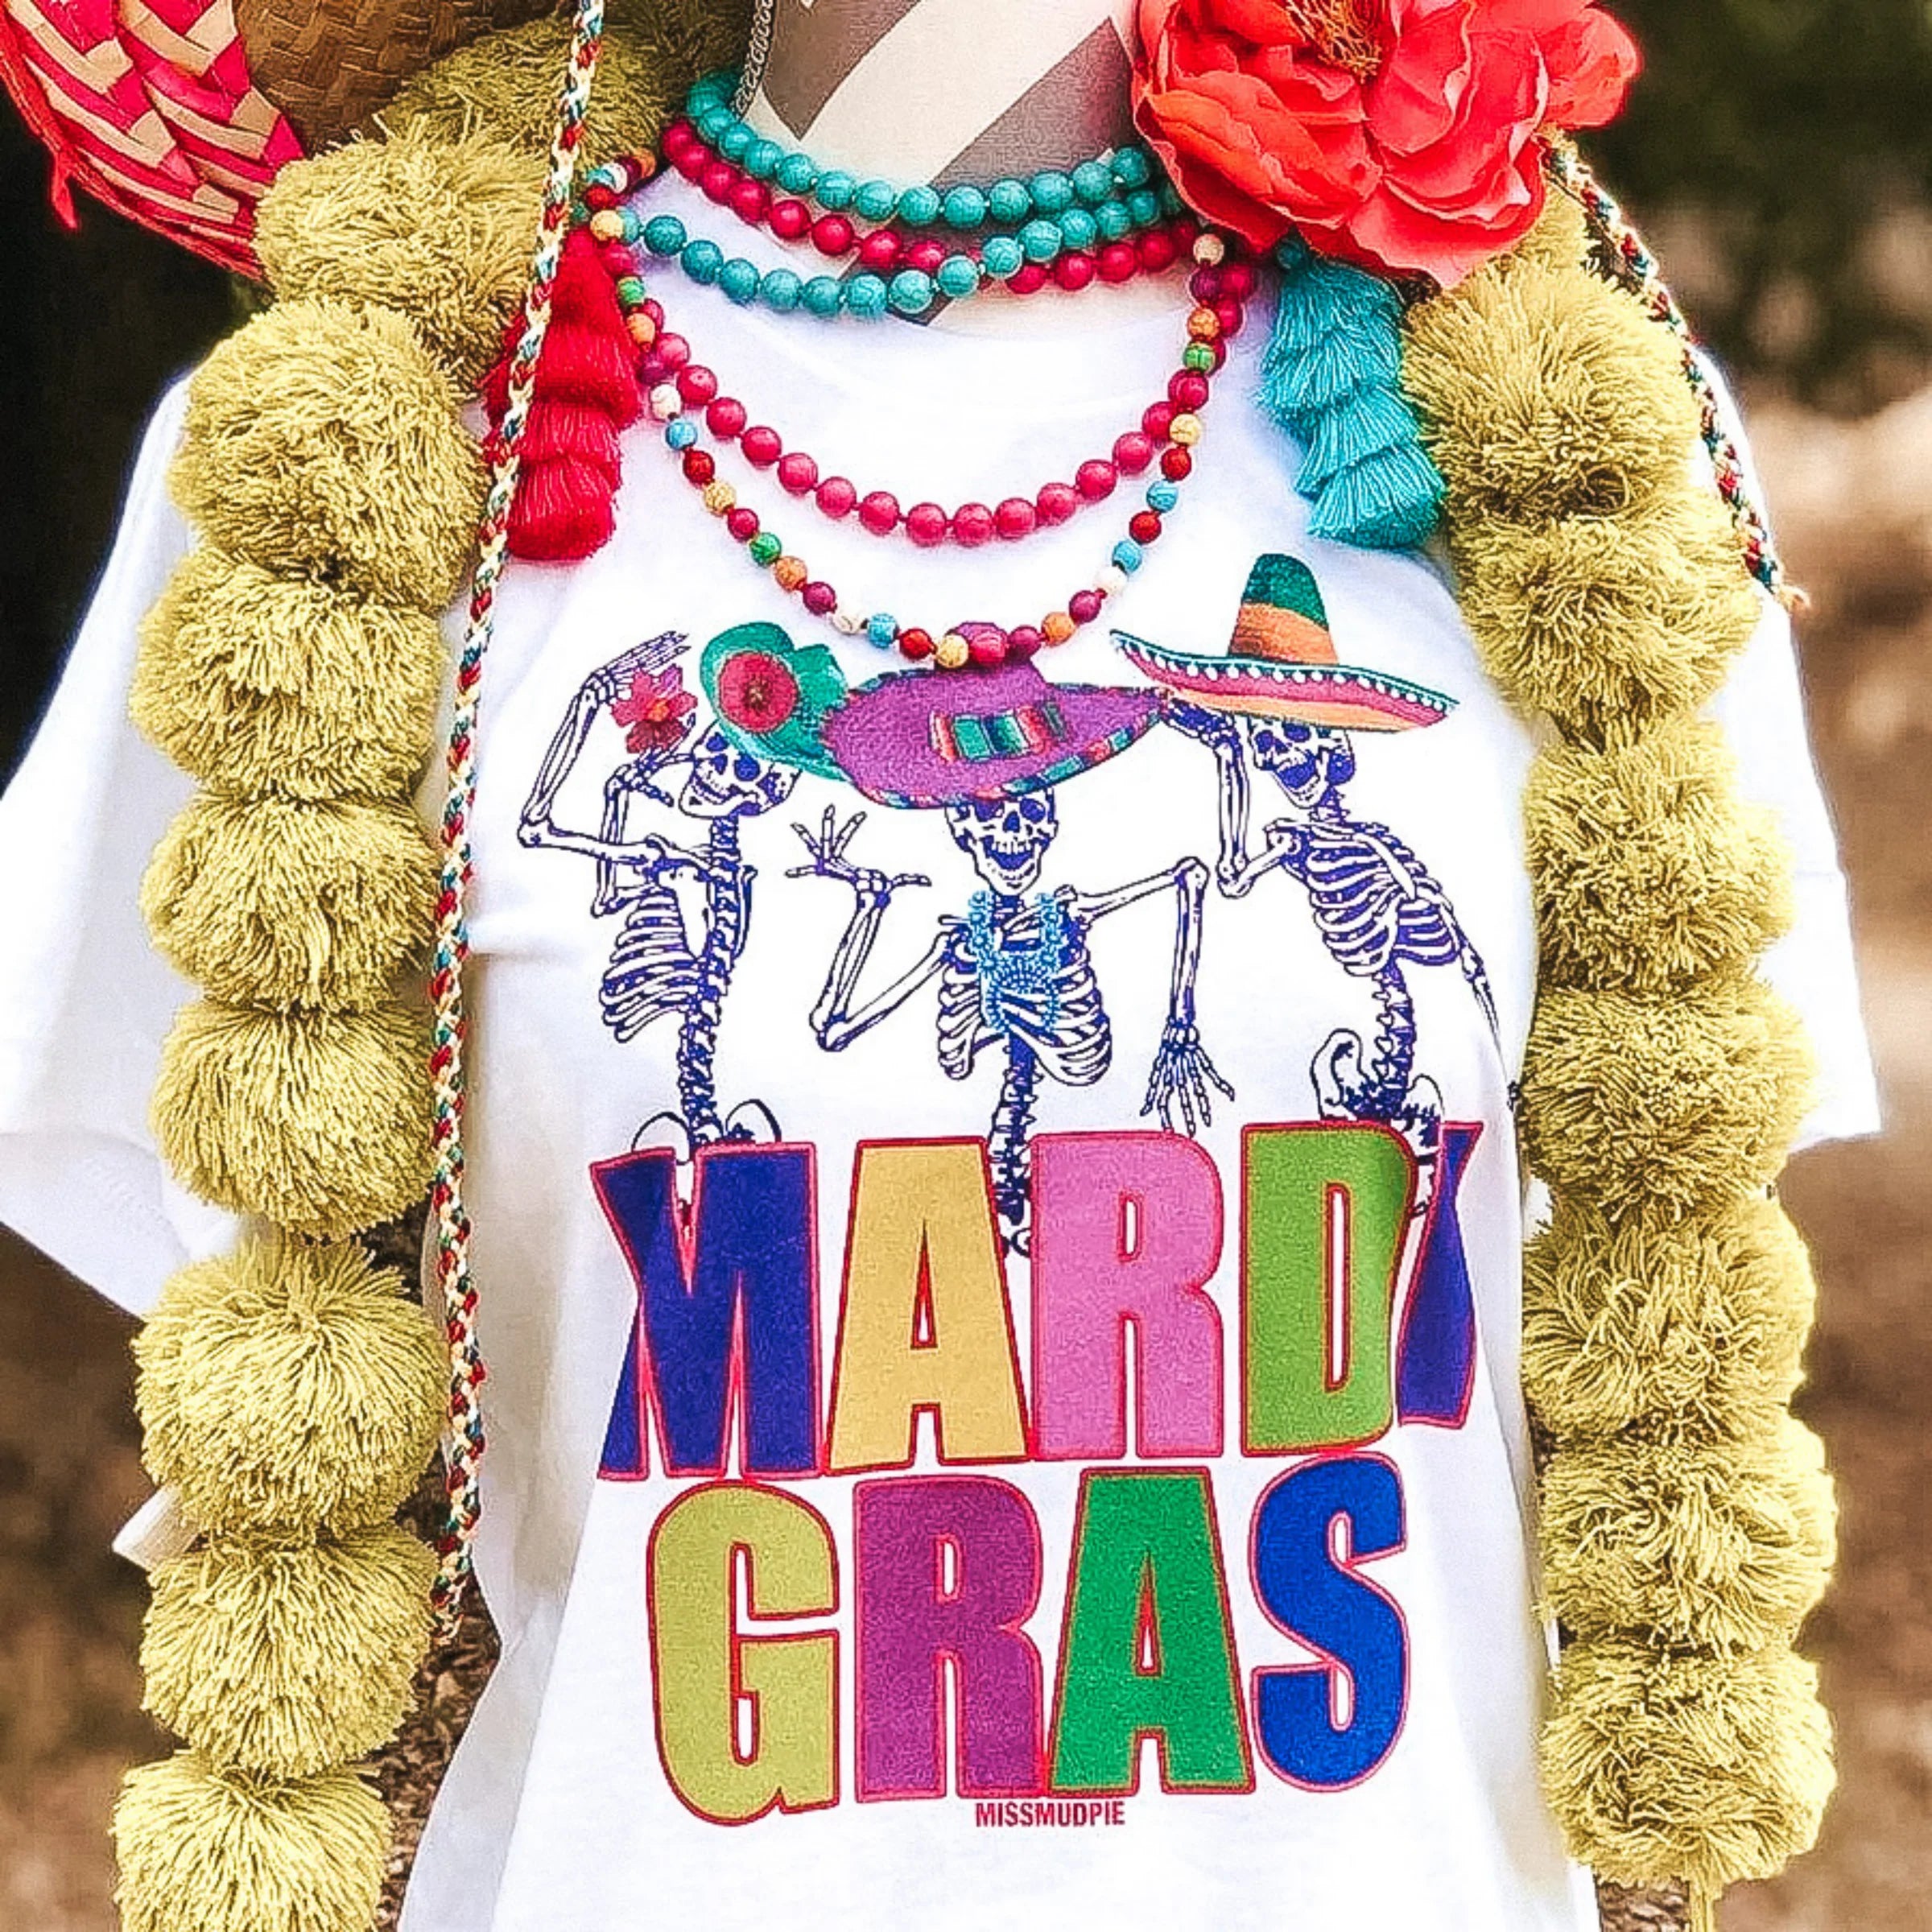 A white crew neck tee shirt with short sleeves. This tee has a graphic of dancing skeletons that says "Mardi Gras" in lots of colors.